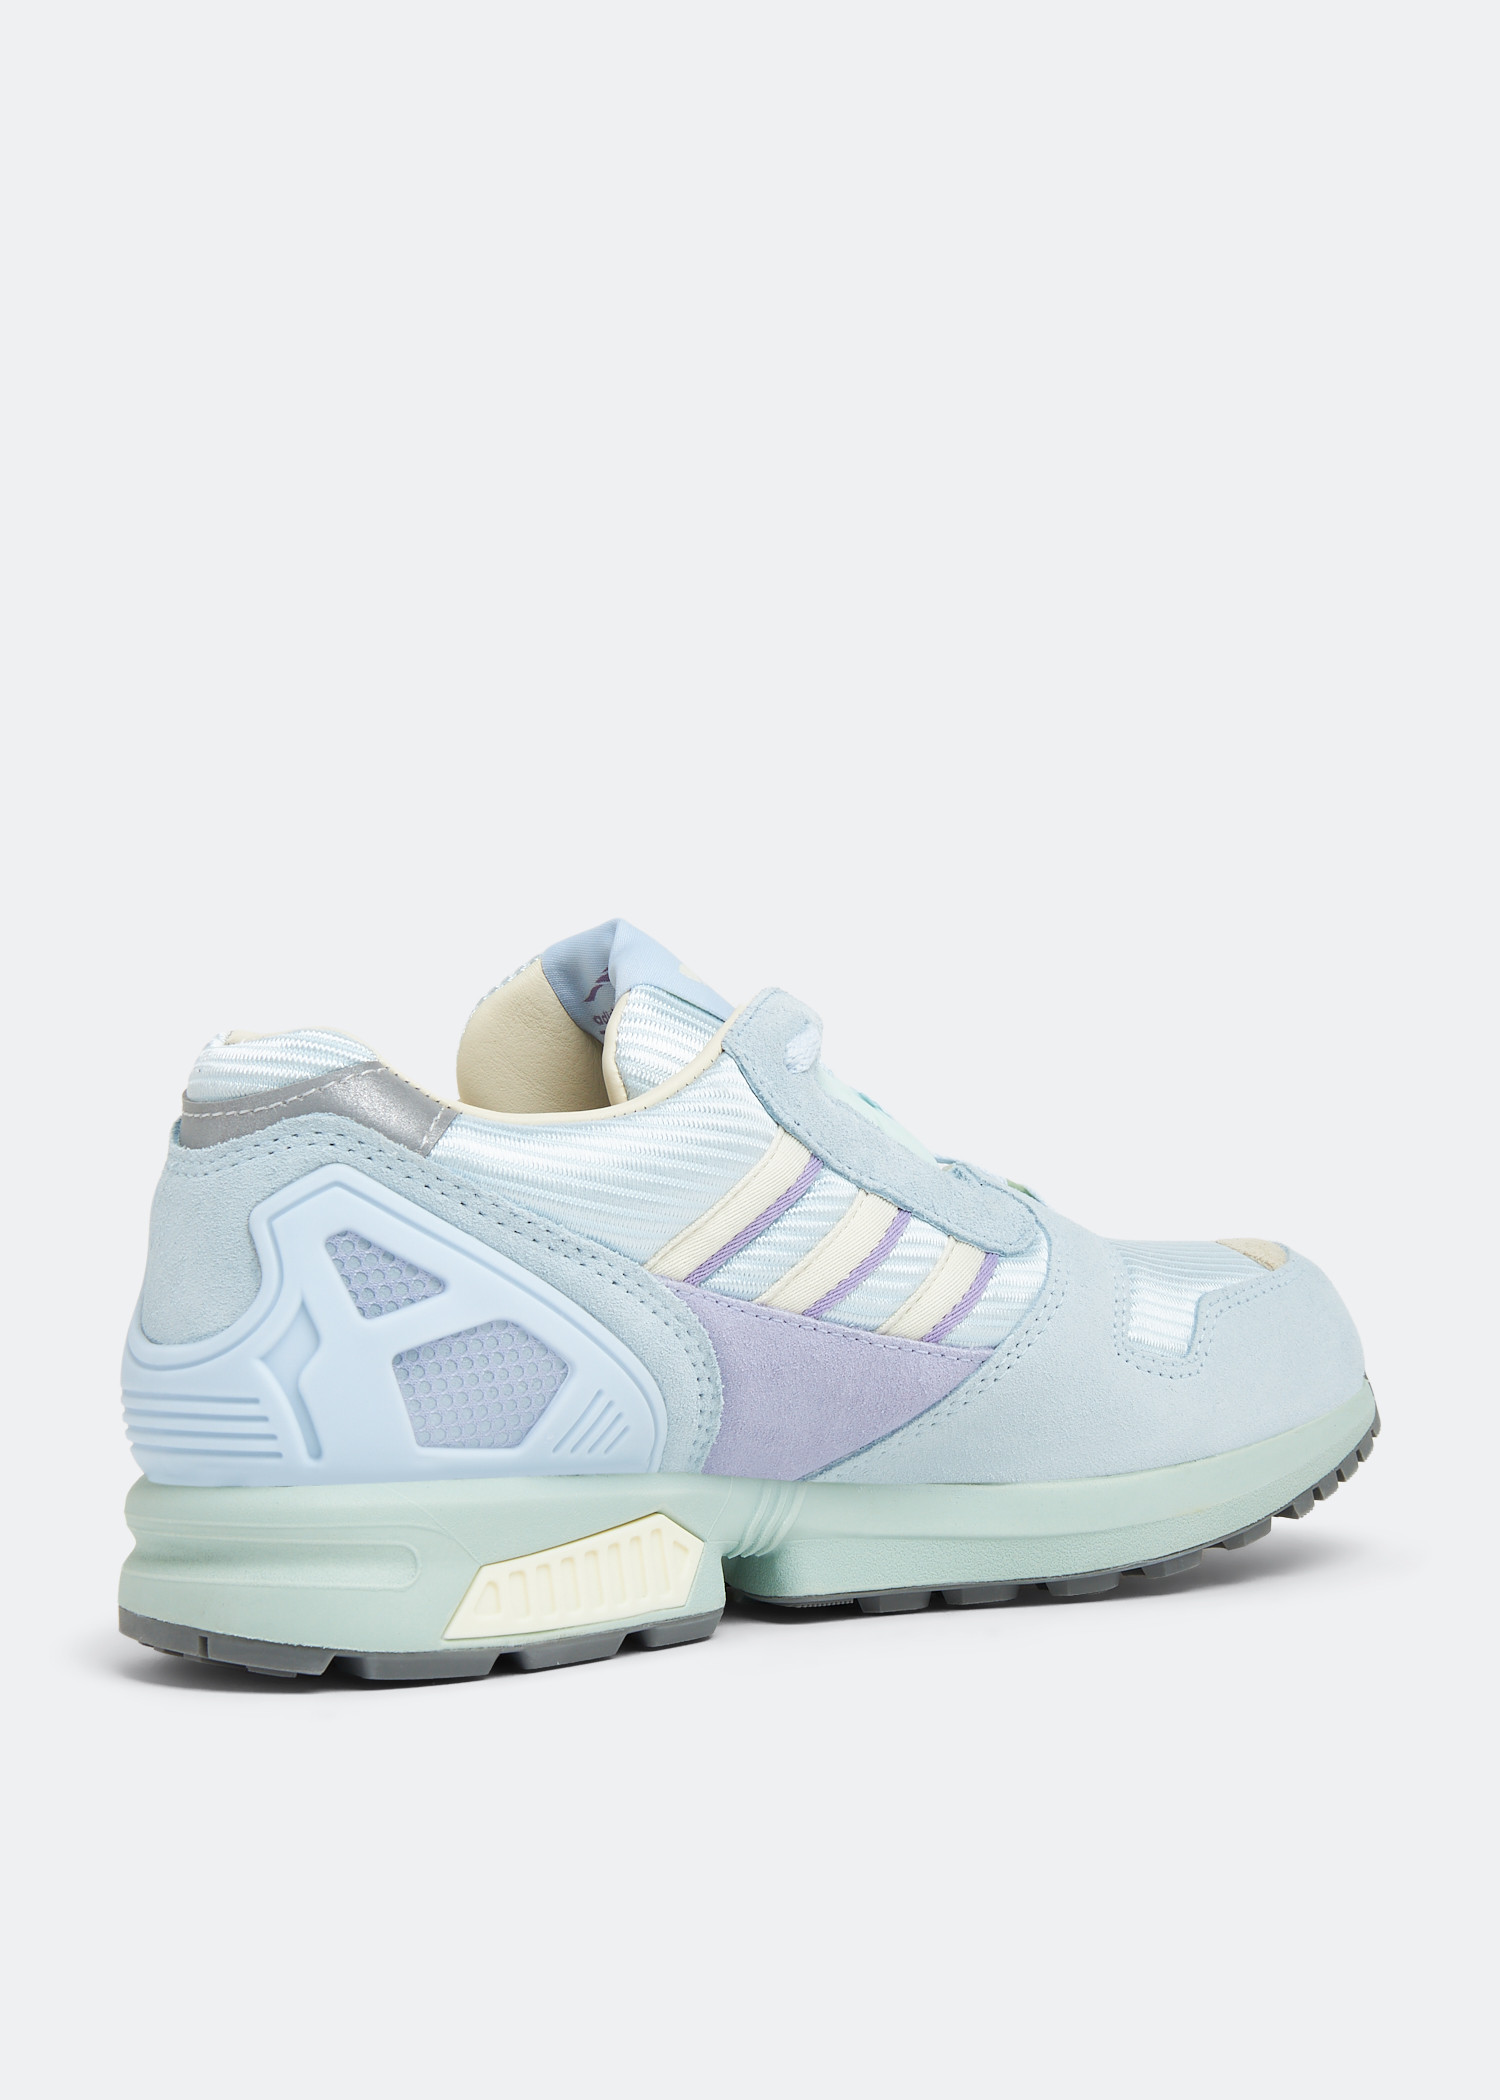 Adidas ZX 8000 sneakers for Women - Blue in KSA | Level Shoes